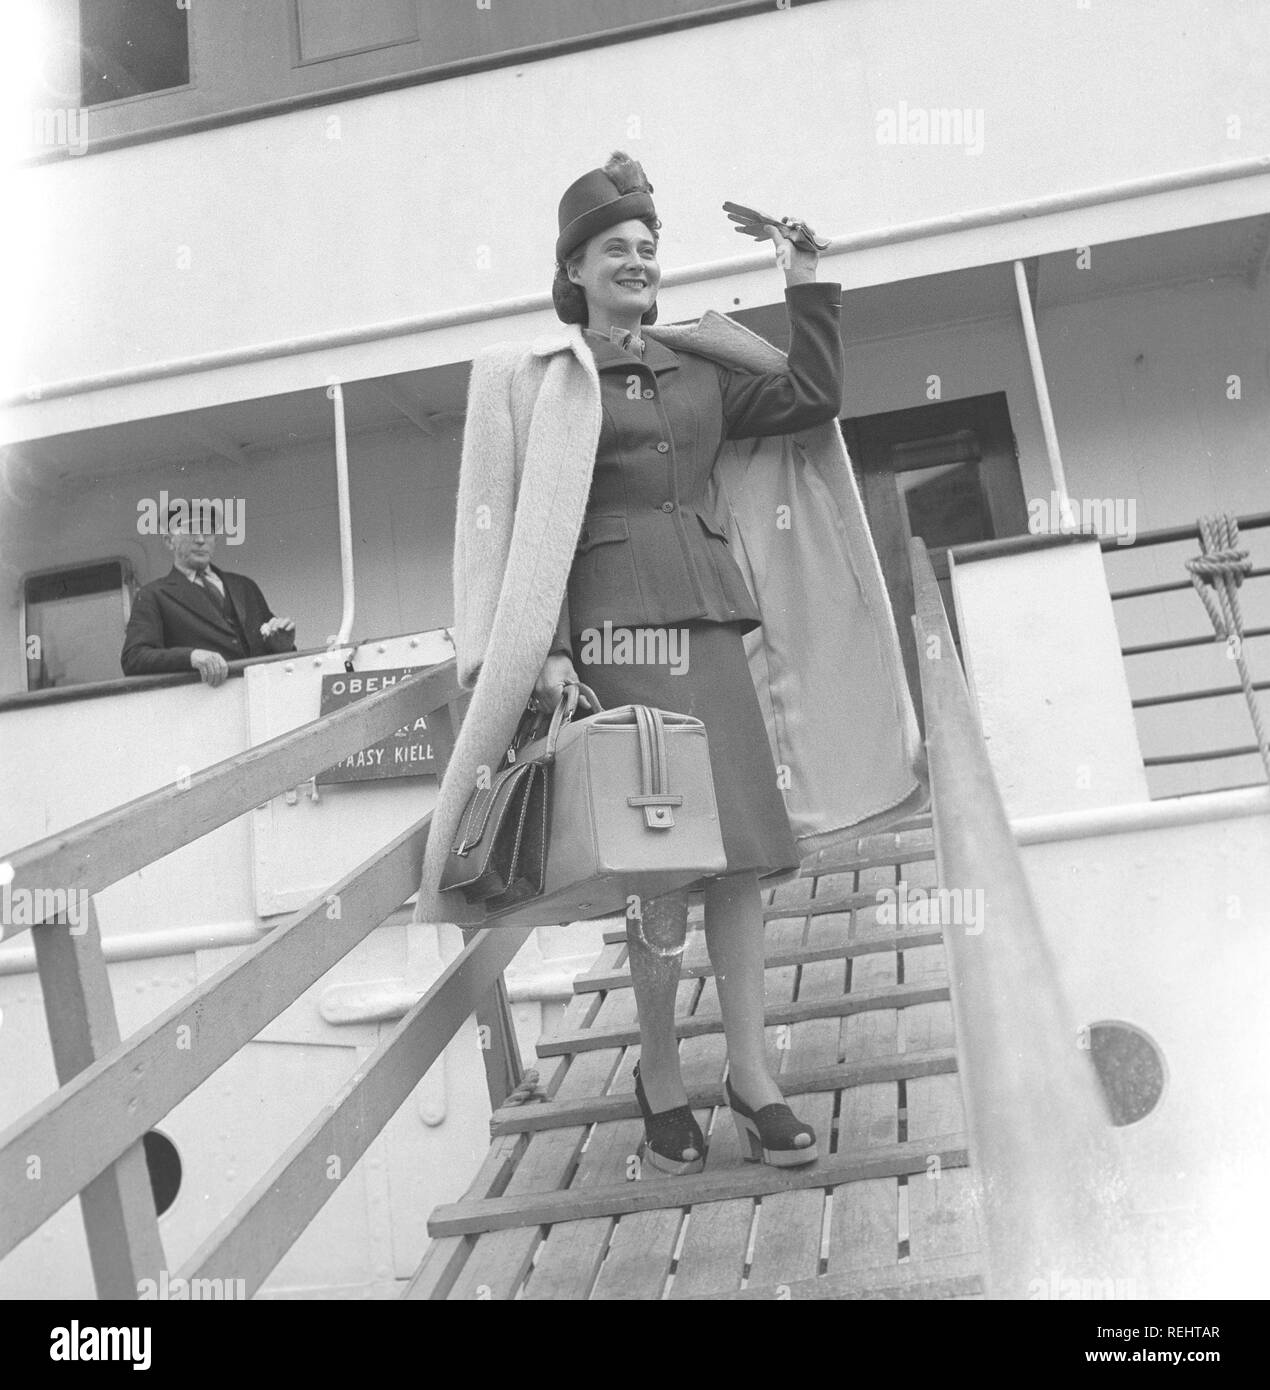 Women's fashion in the 1940s. A young woman in a typical 1940s jacket and skirt, with matching hat, shoes, gloves and handbag. She waves at someone waiting for her on the quay when arriving after travelling with a passenger ship.  Photo Kristoffersson Ref V77-1. Sweden 1947 Stock Photo